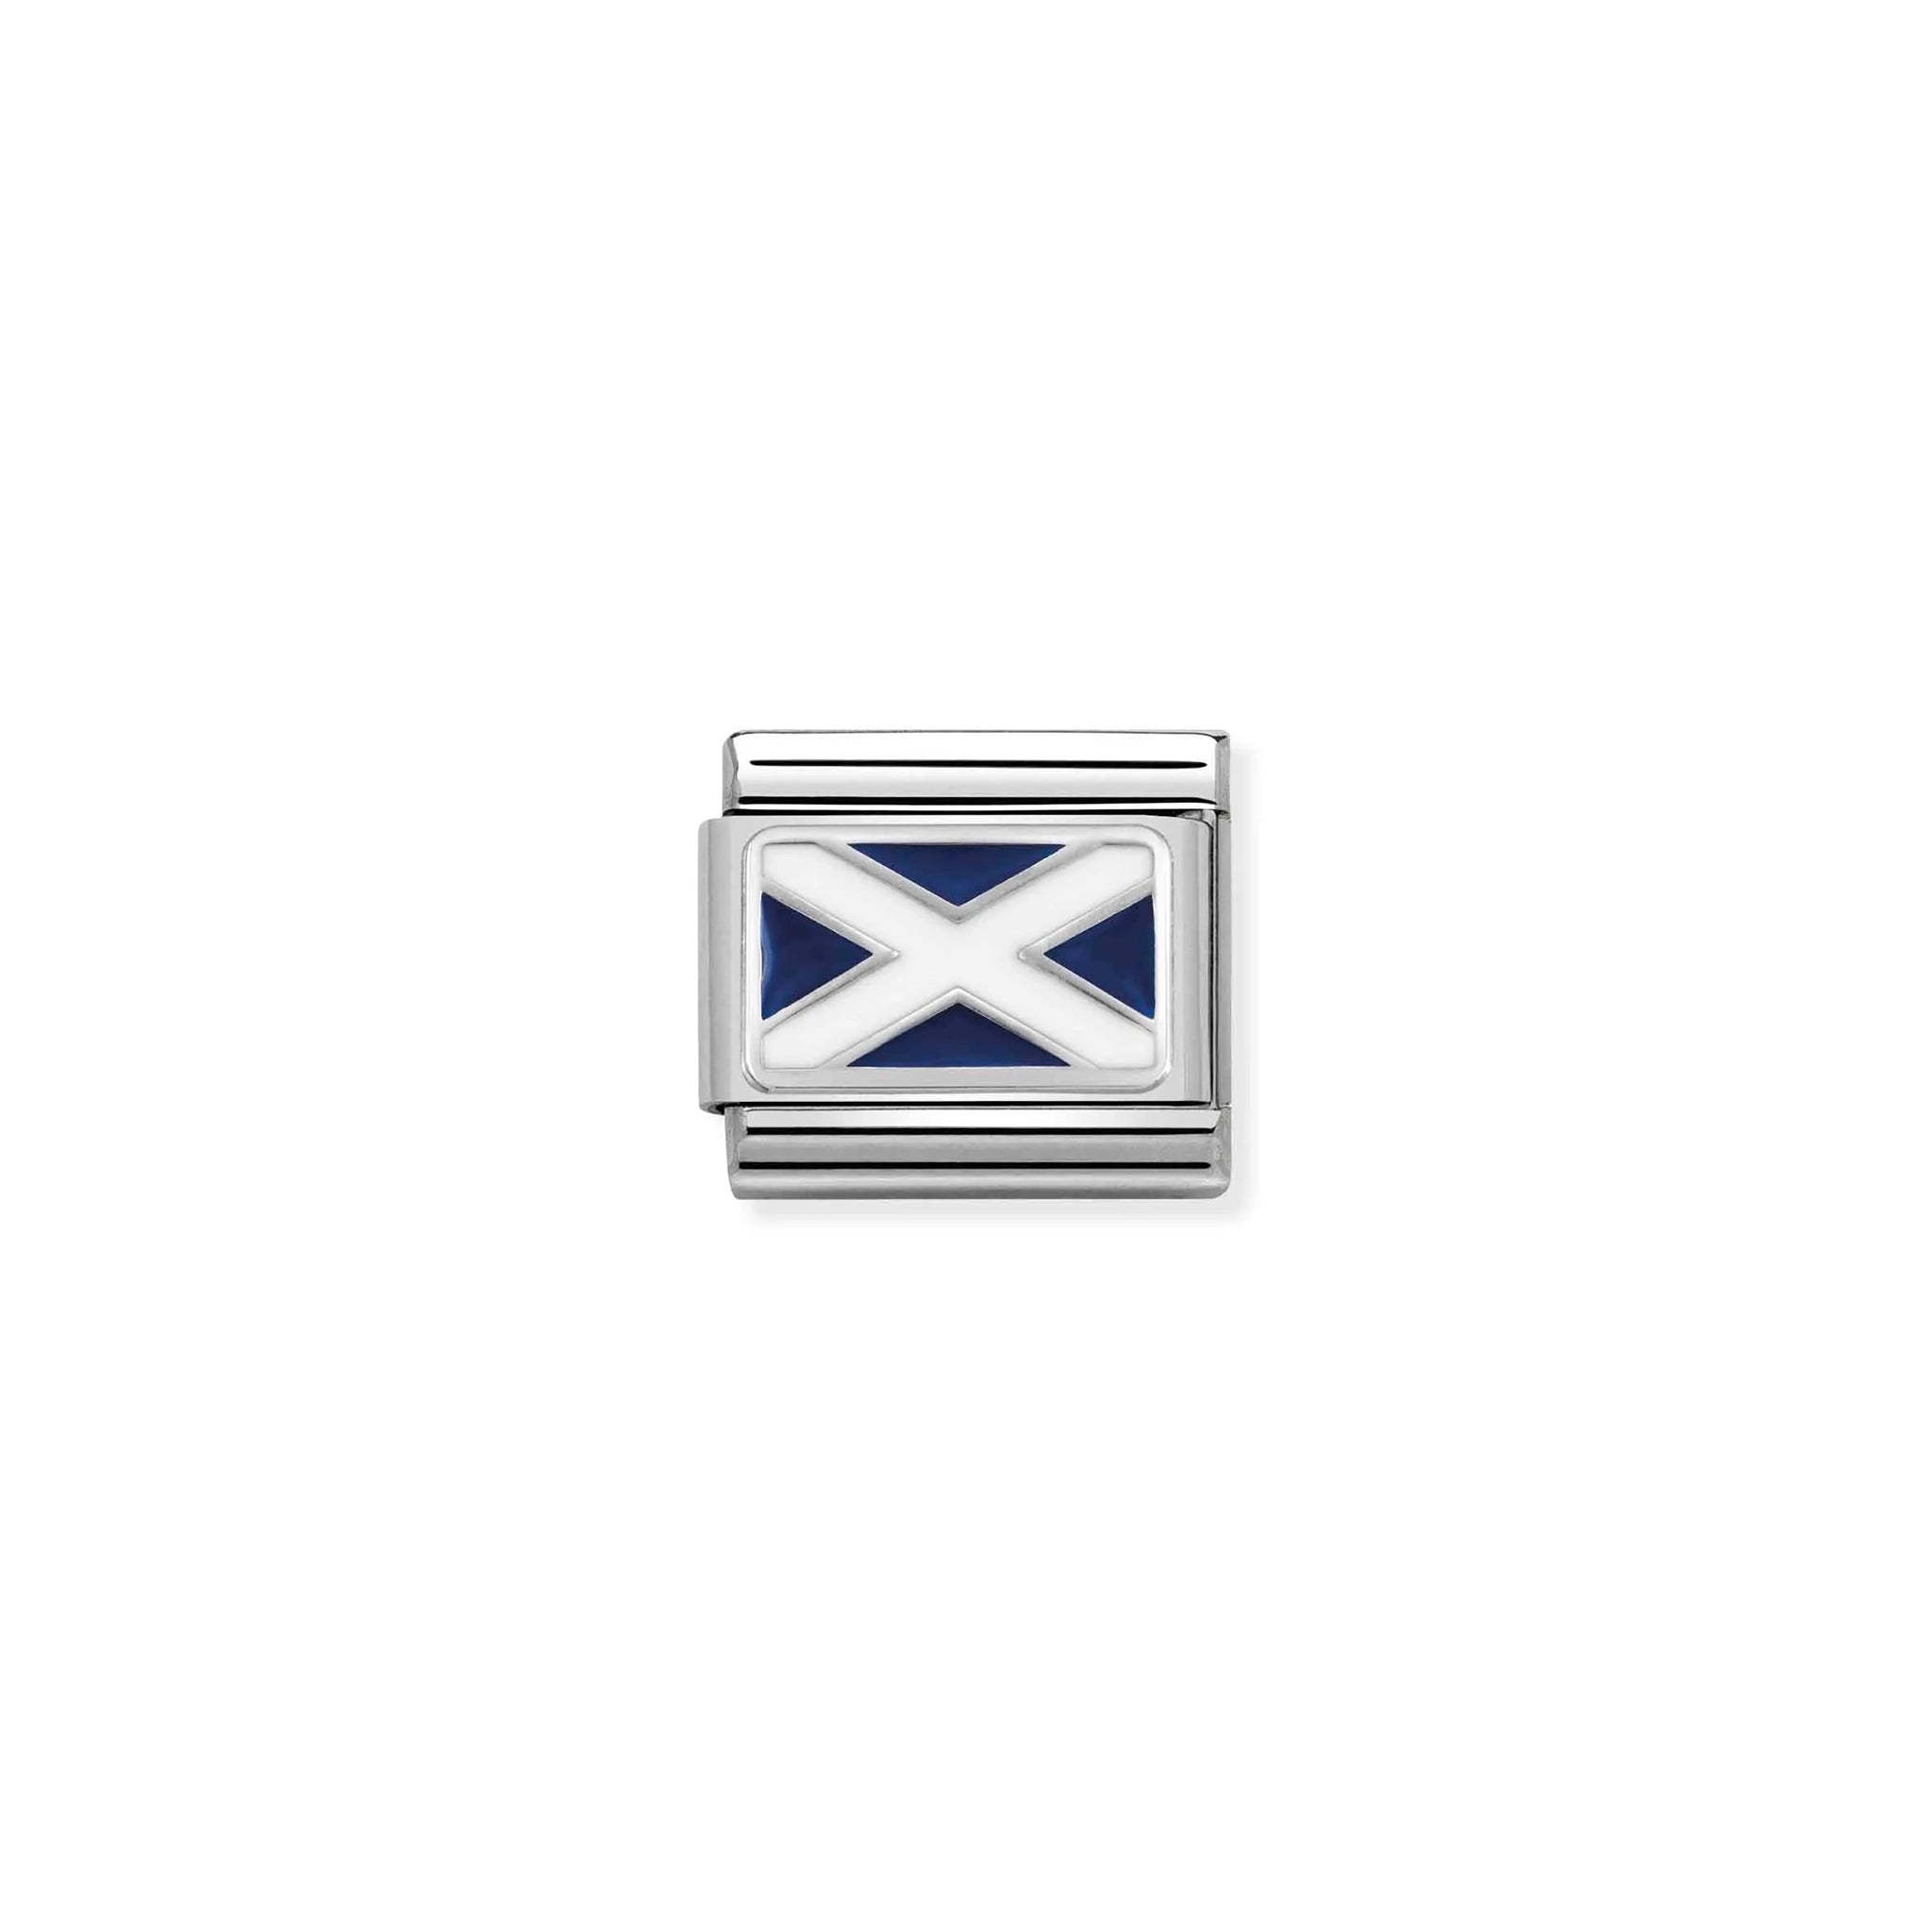 Nomination charm link featuring the Scottish flag with blue and white enamel and silver outline